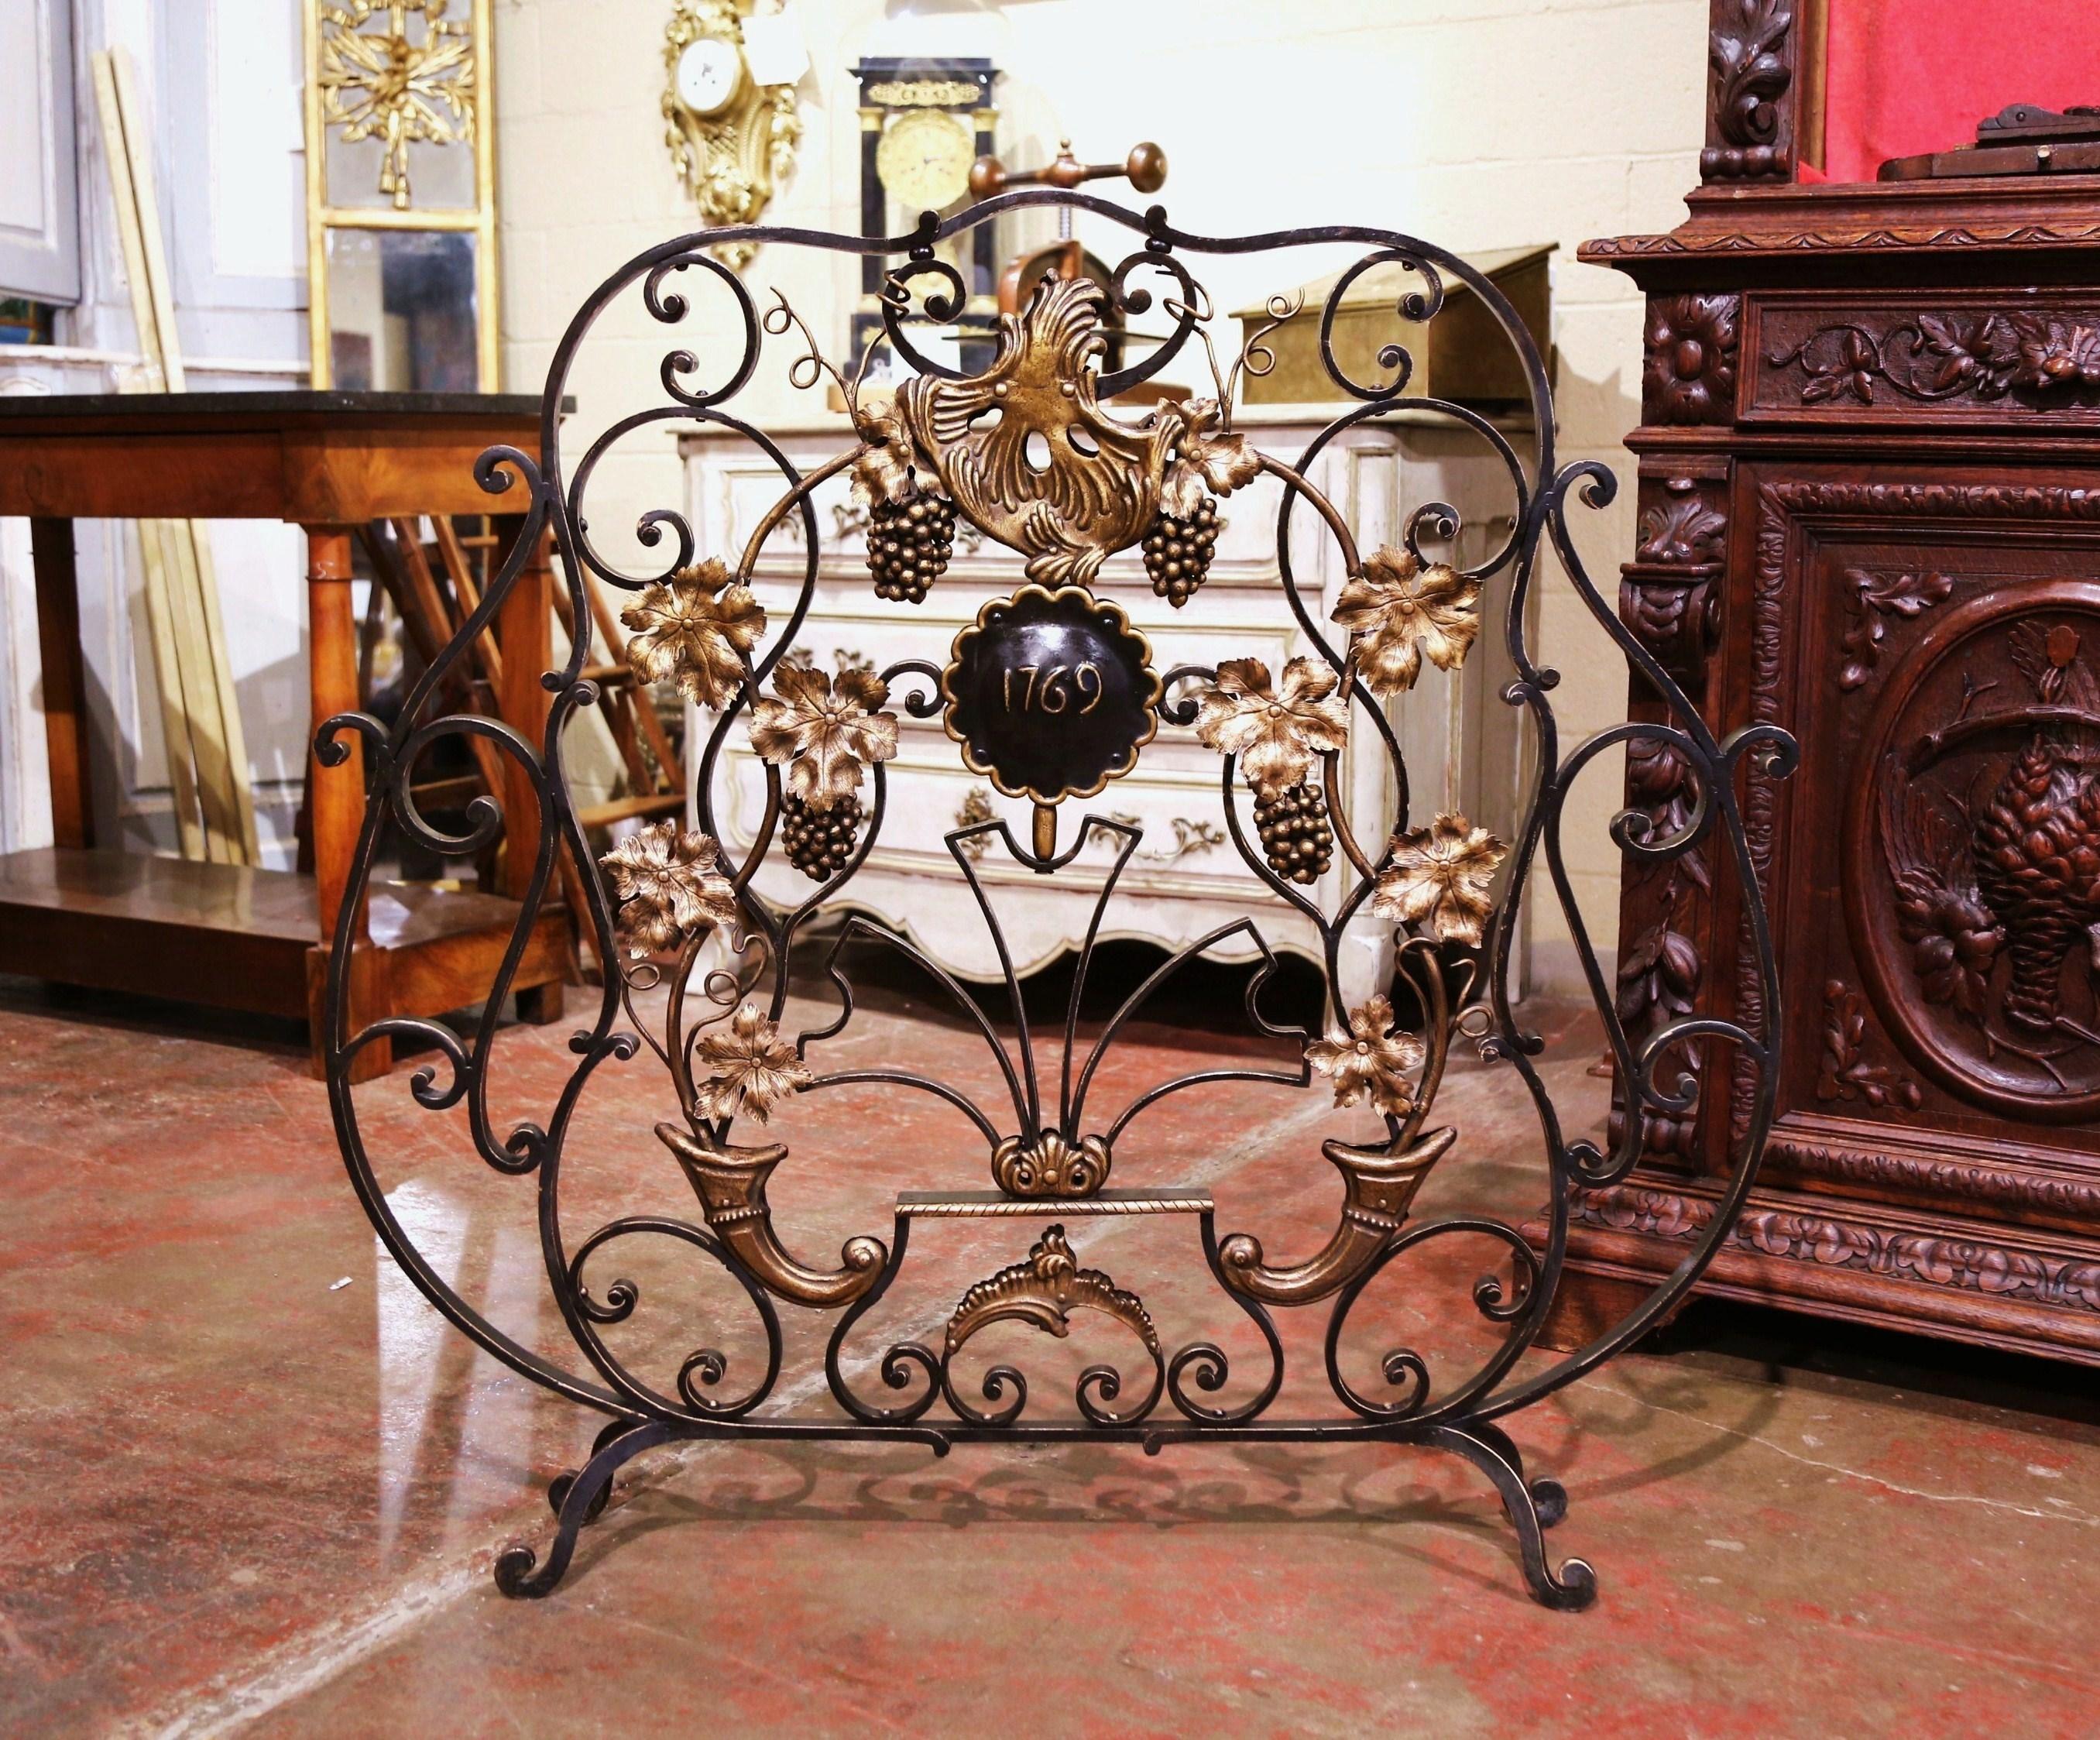 Forged Mid-20th Century French Louis XV Wrought Iron Fireplace Screen with Vine Motifs For Sale